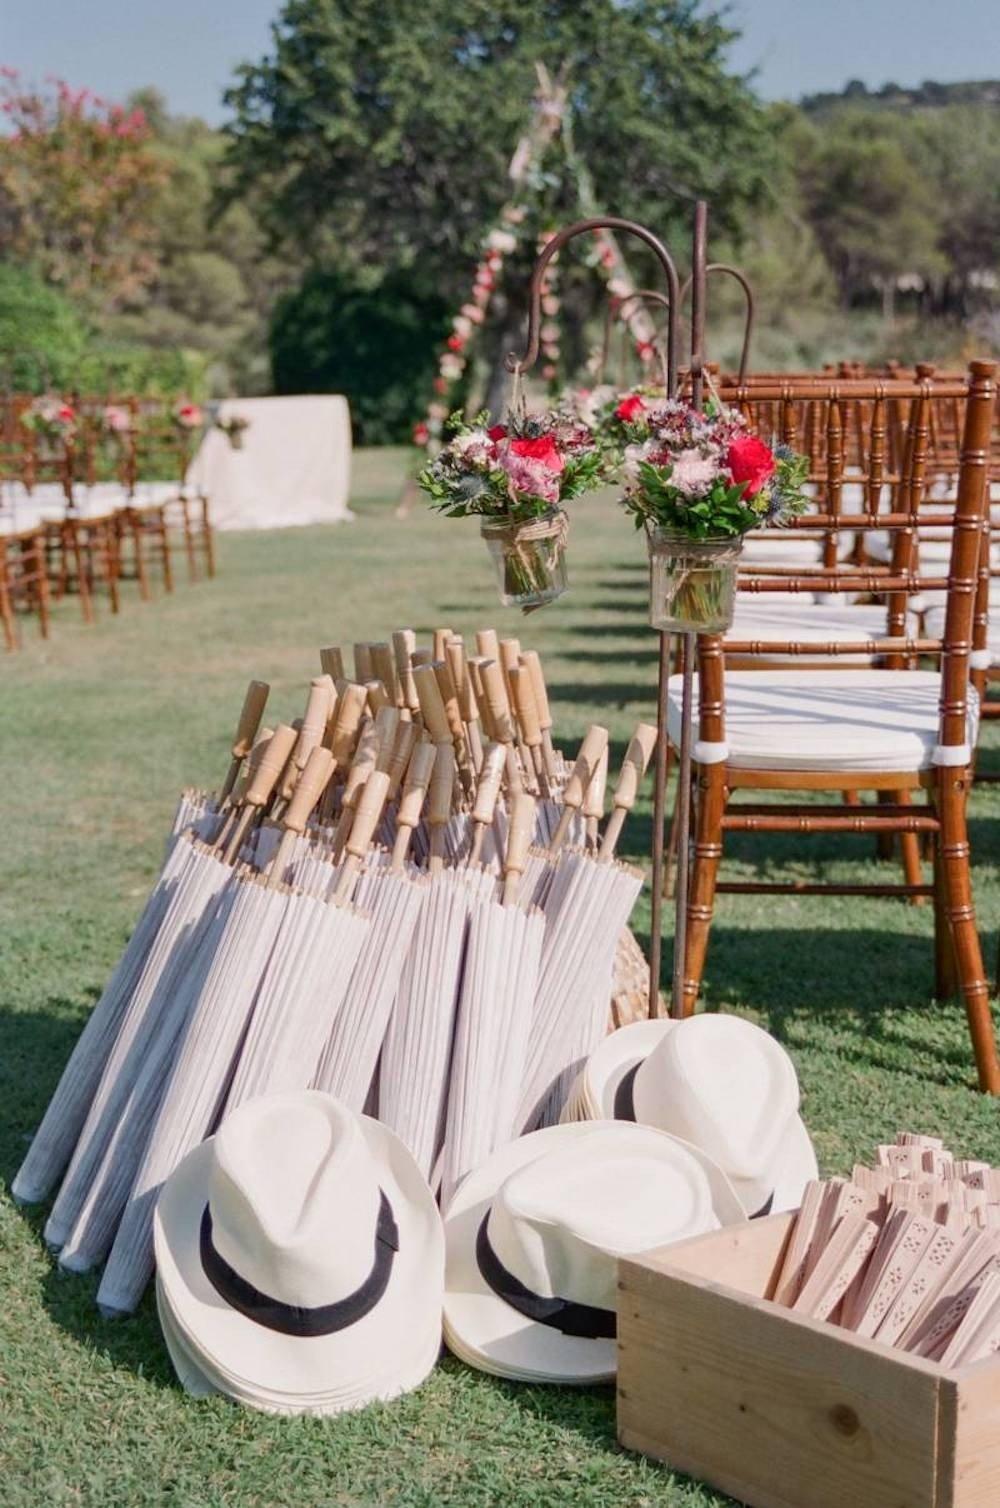 63 Outdoor Wedding Ideas You'll Fall in Love With 